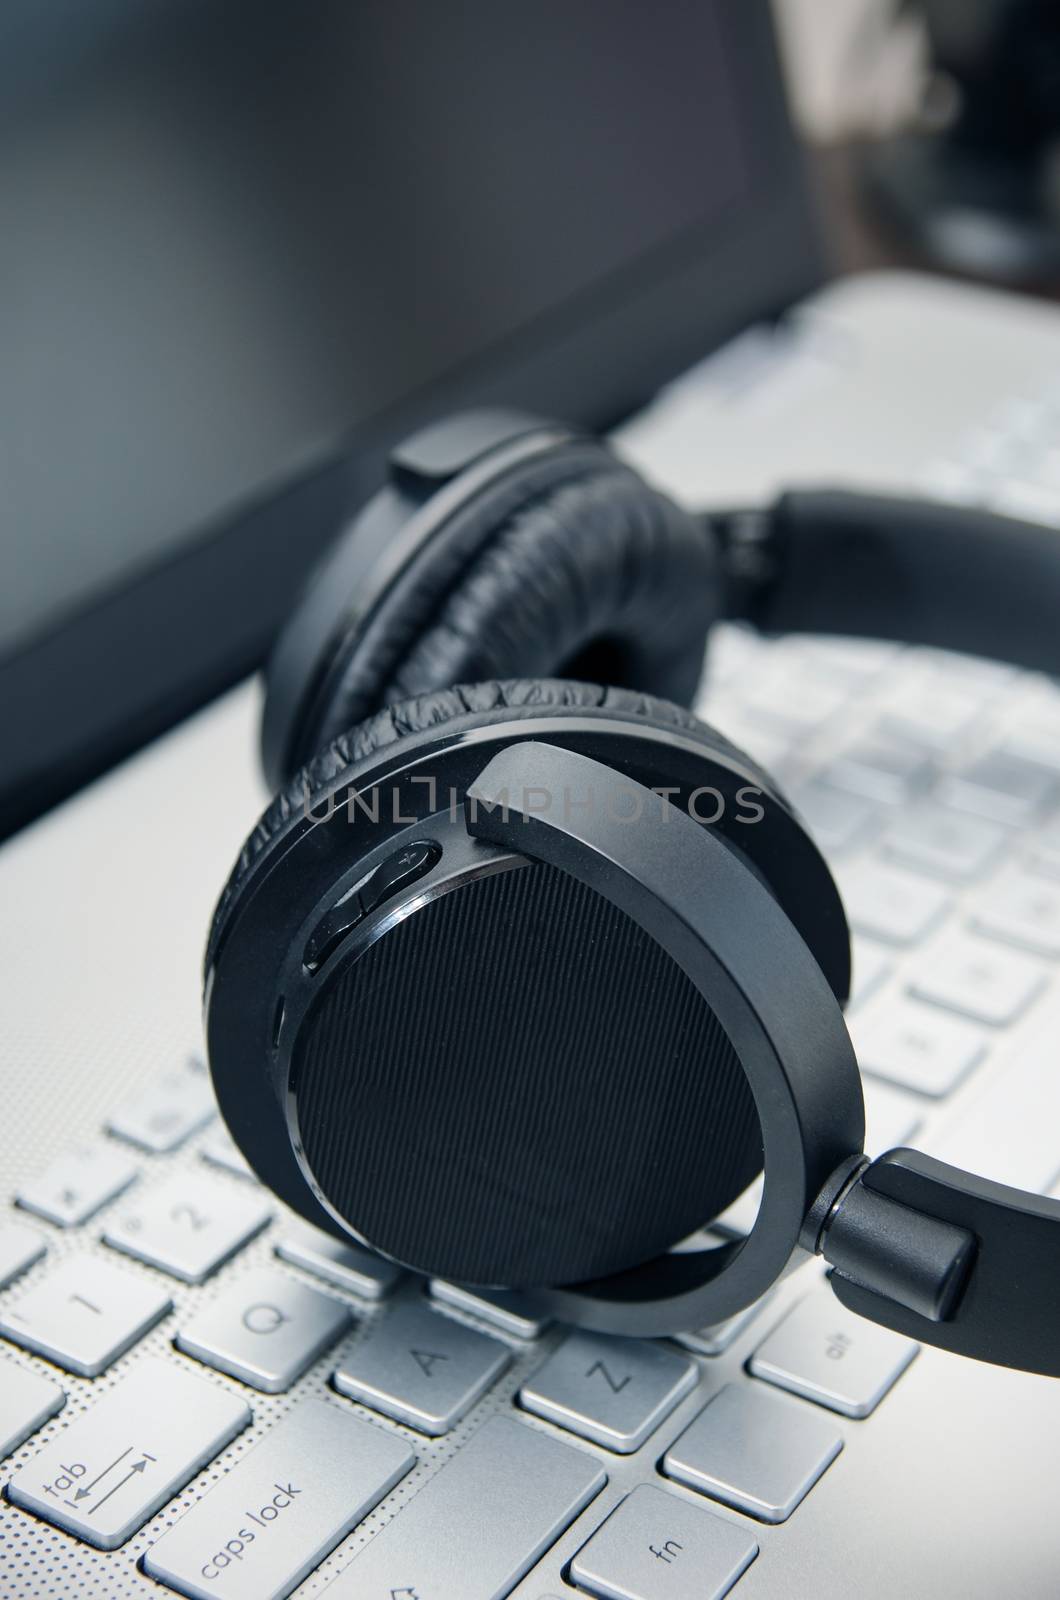 Wireless headphones on laptop keyboard. Music and gaming concept.